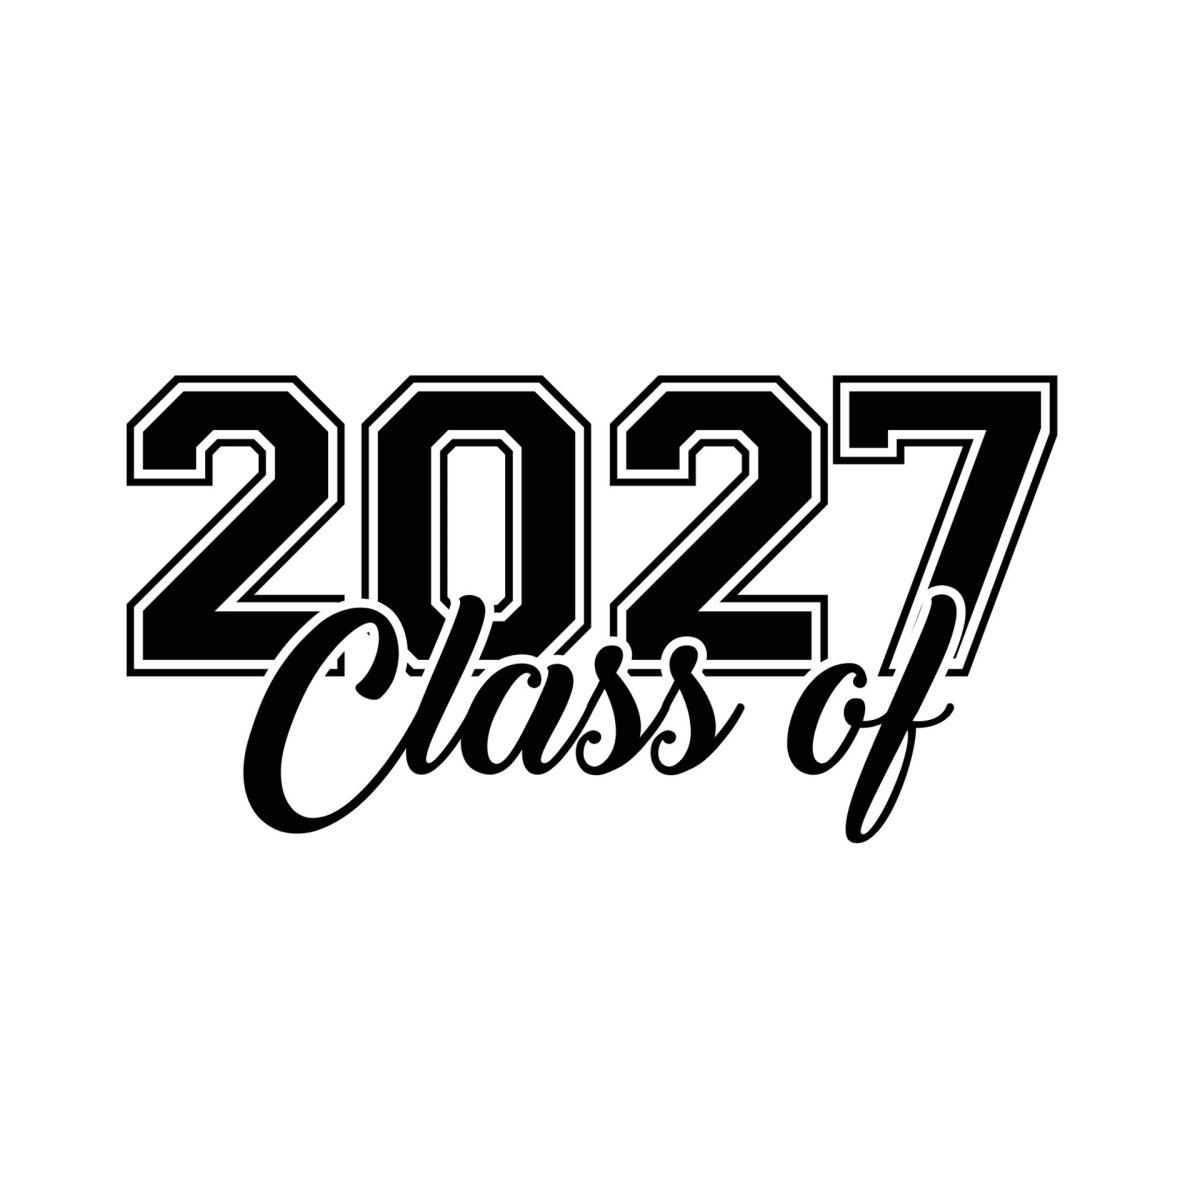 Class of 2027 Officer Candidates (for 24-25 School Year)